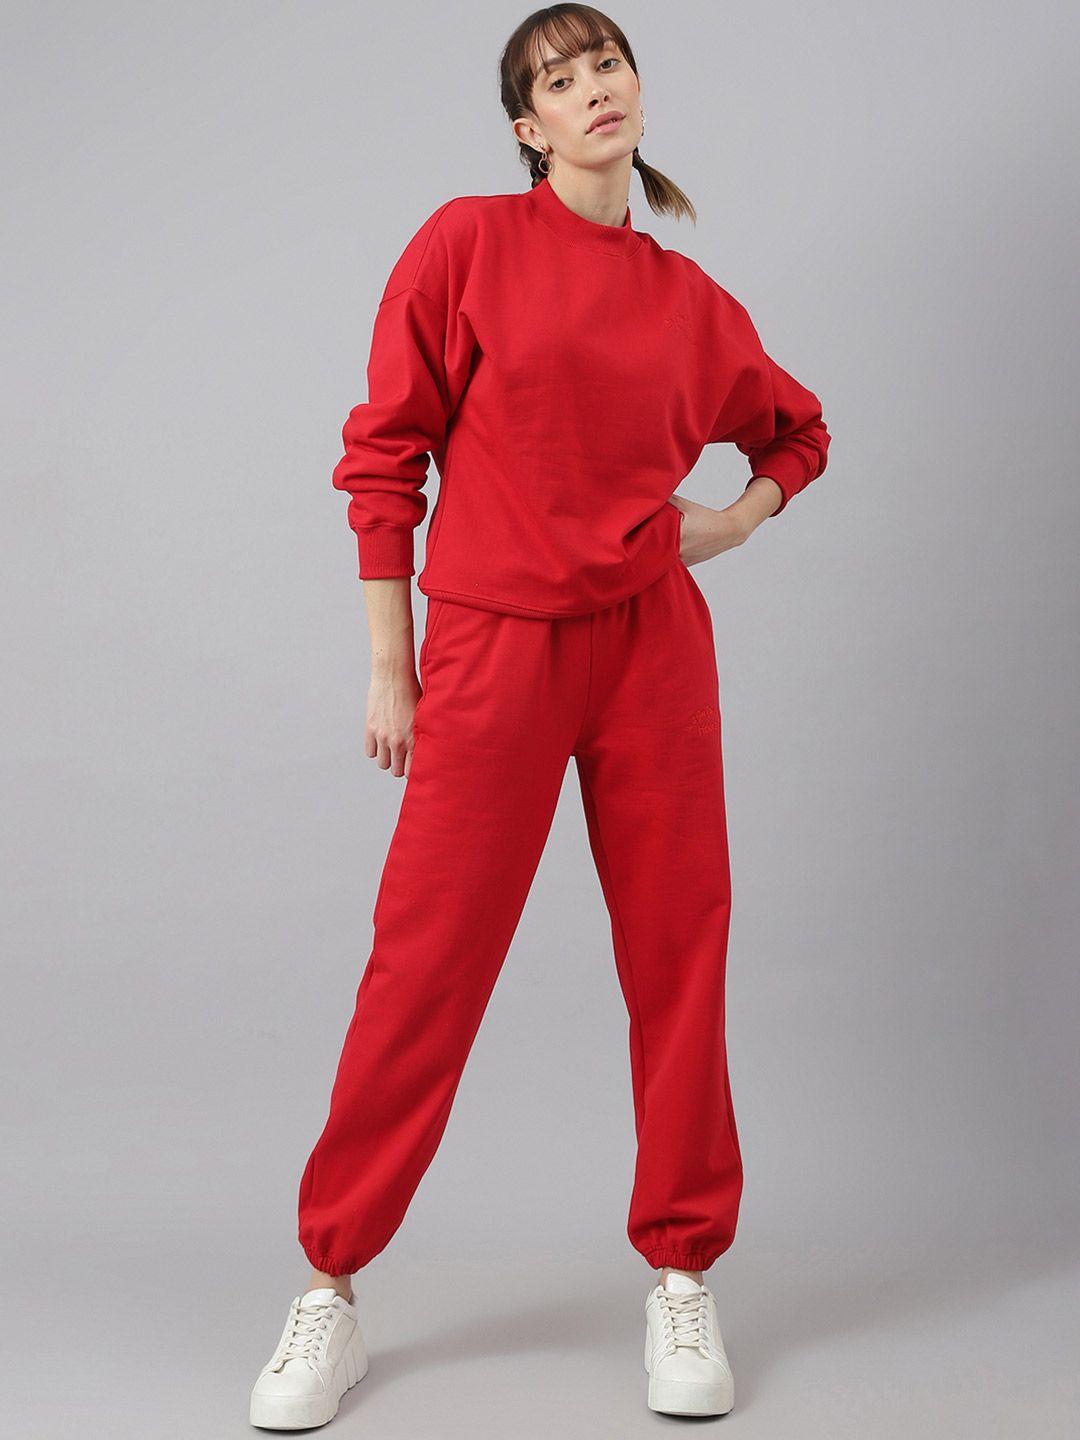 fitkin women high-rise tracksuit